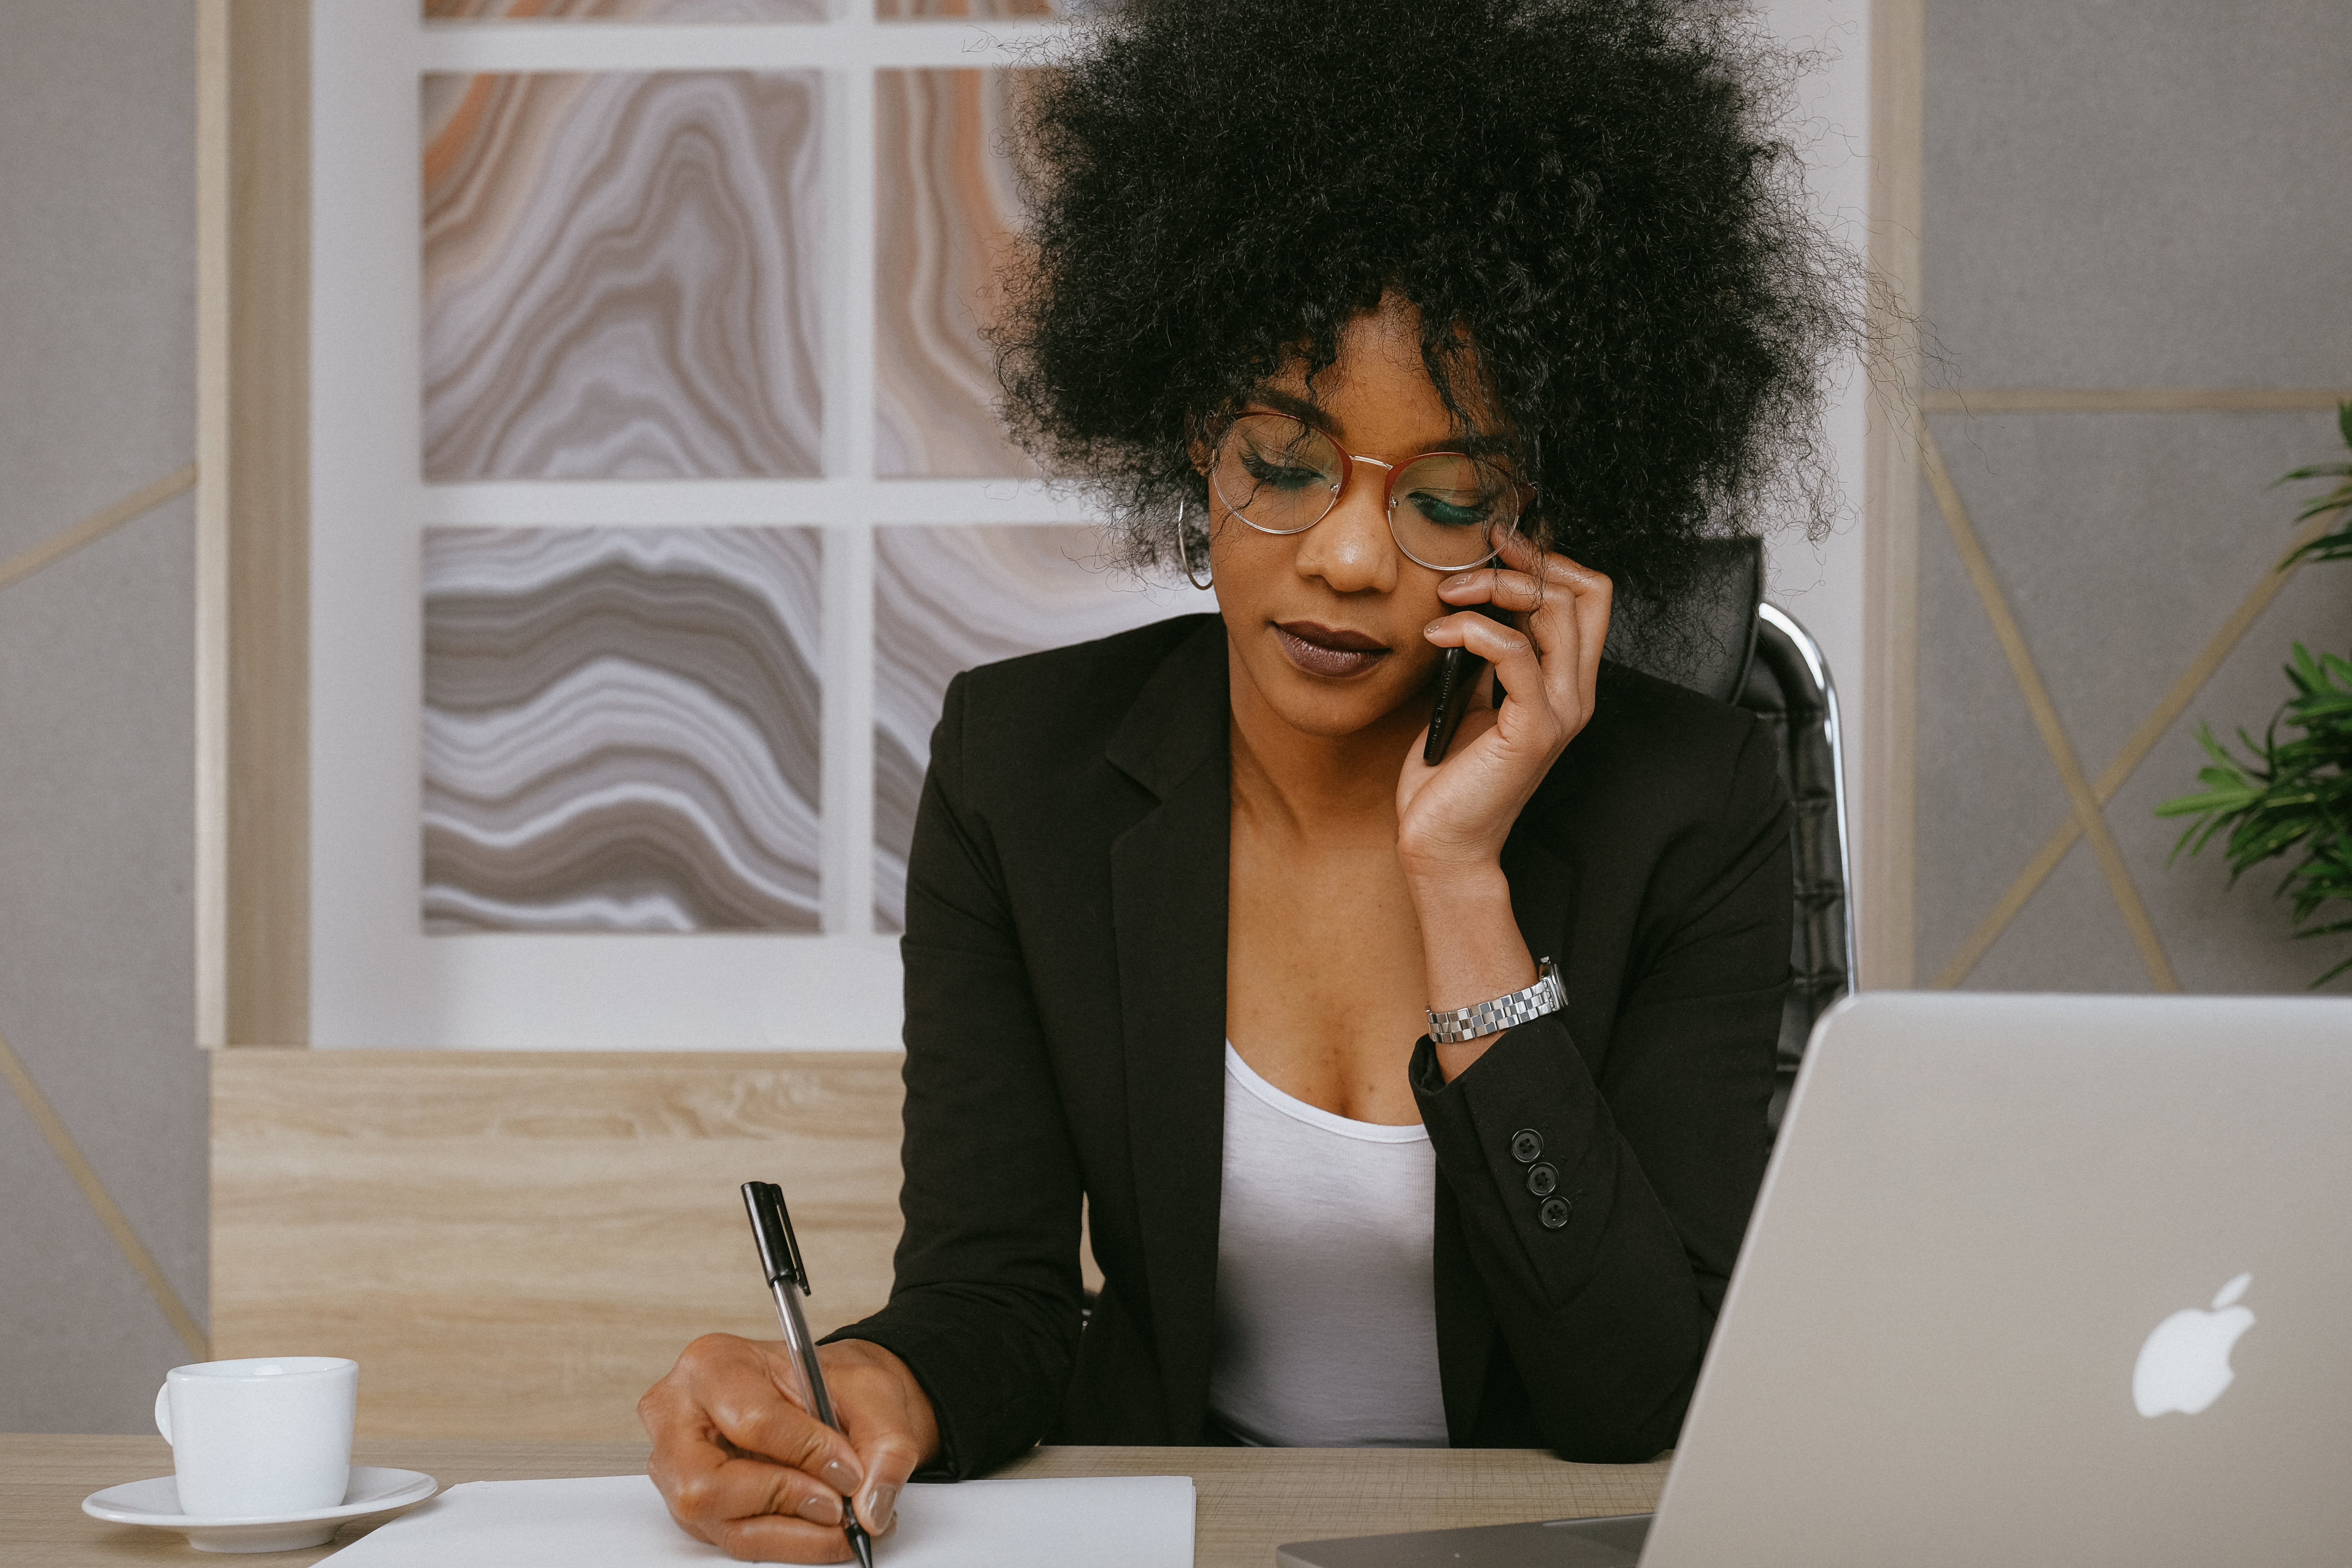 A hardworking woman on the phone while writing something down in her office | Source: Pexels